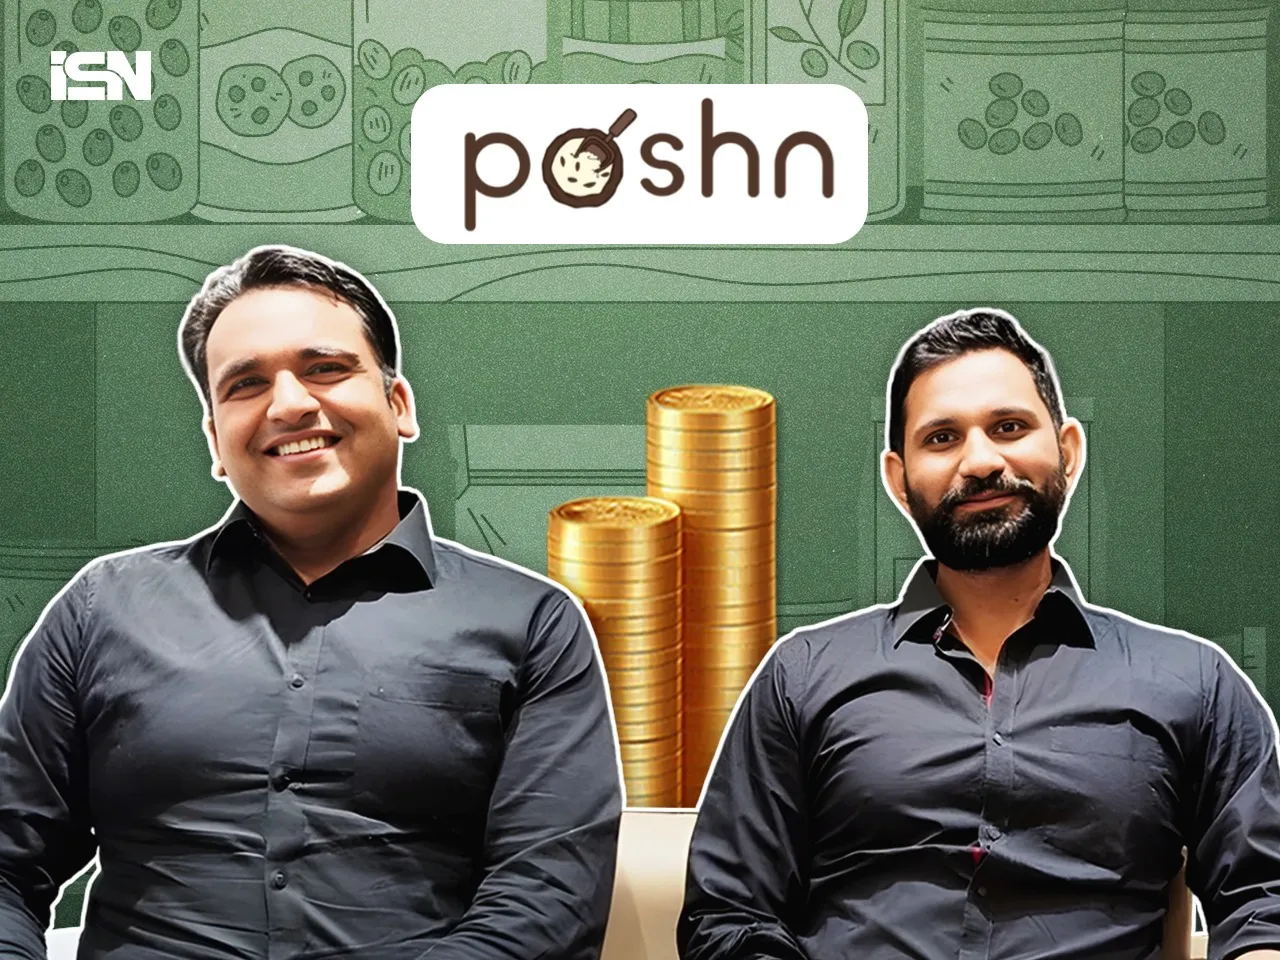 Foodtech startup Poshn raises $6M in debt and equity led by Prime Venture Partners, others